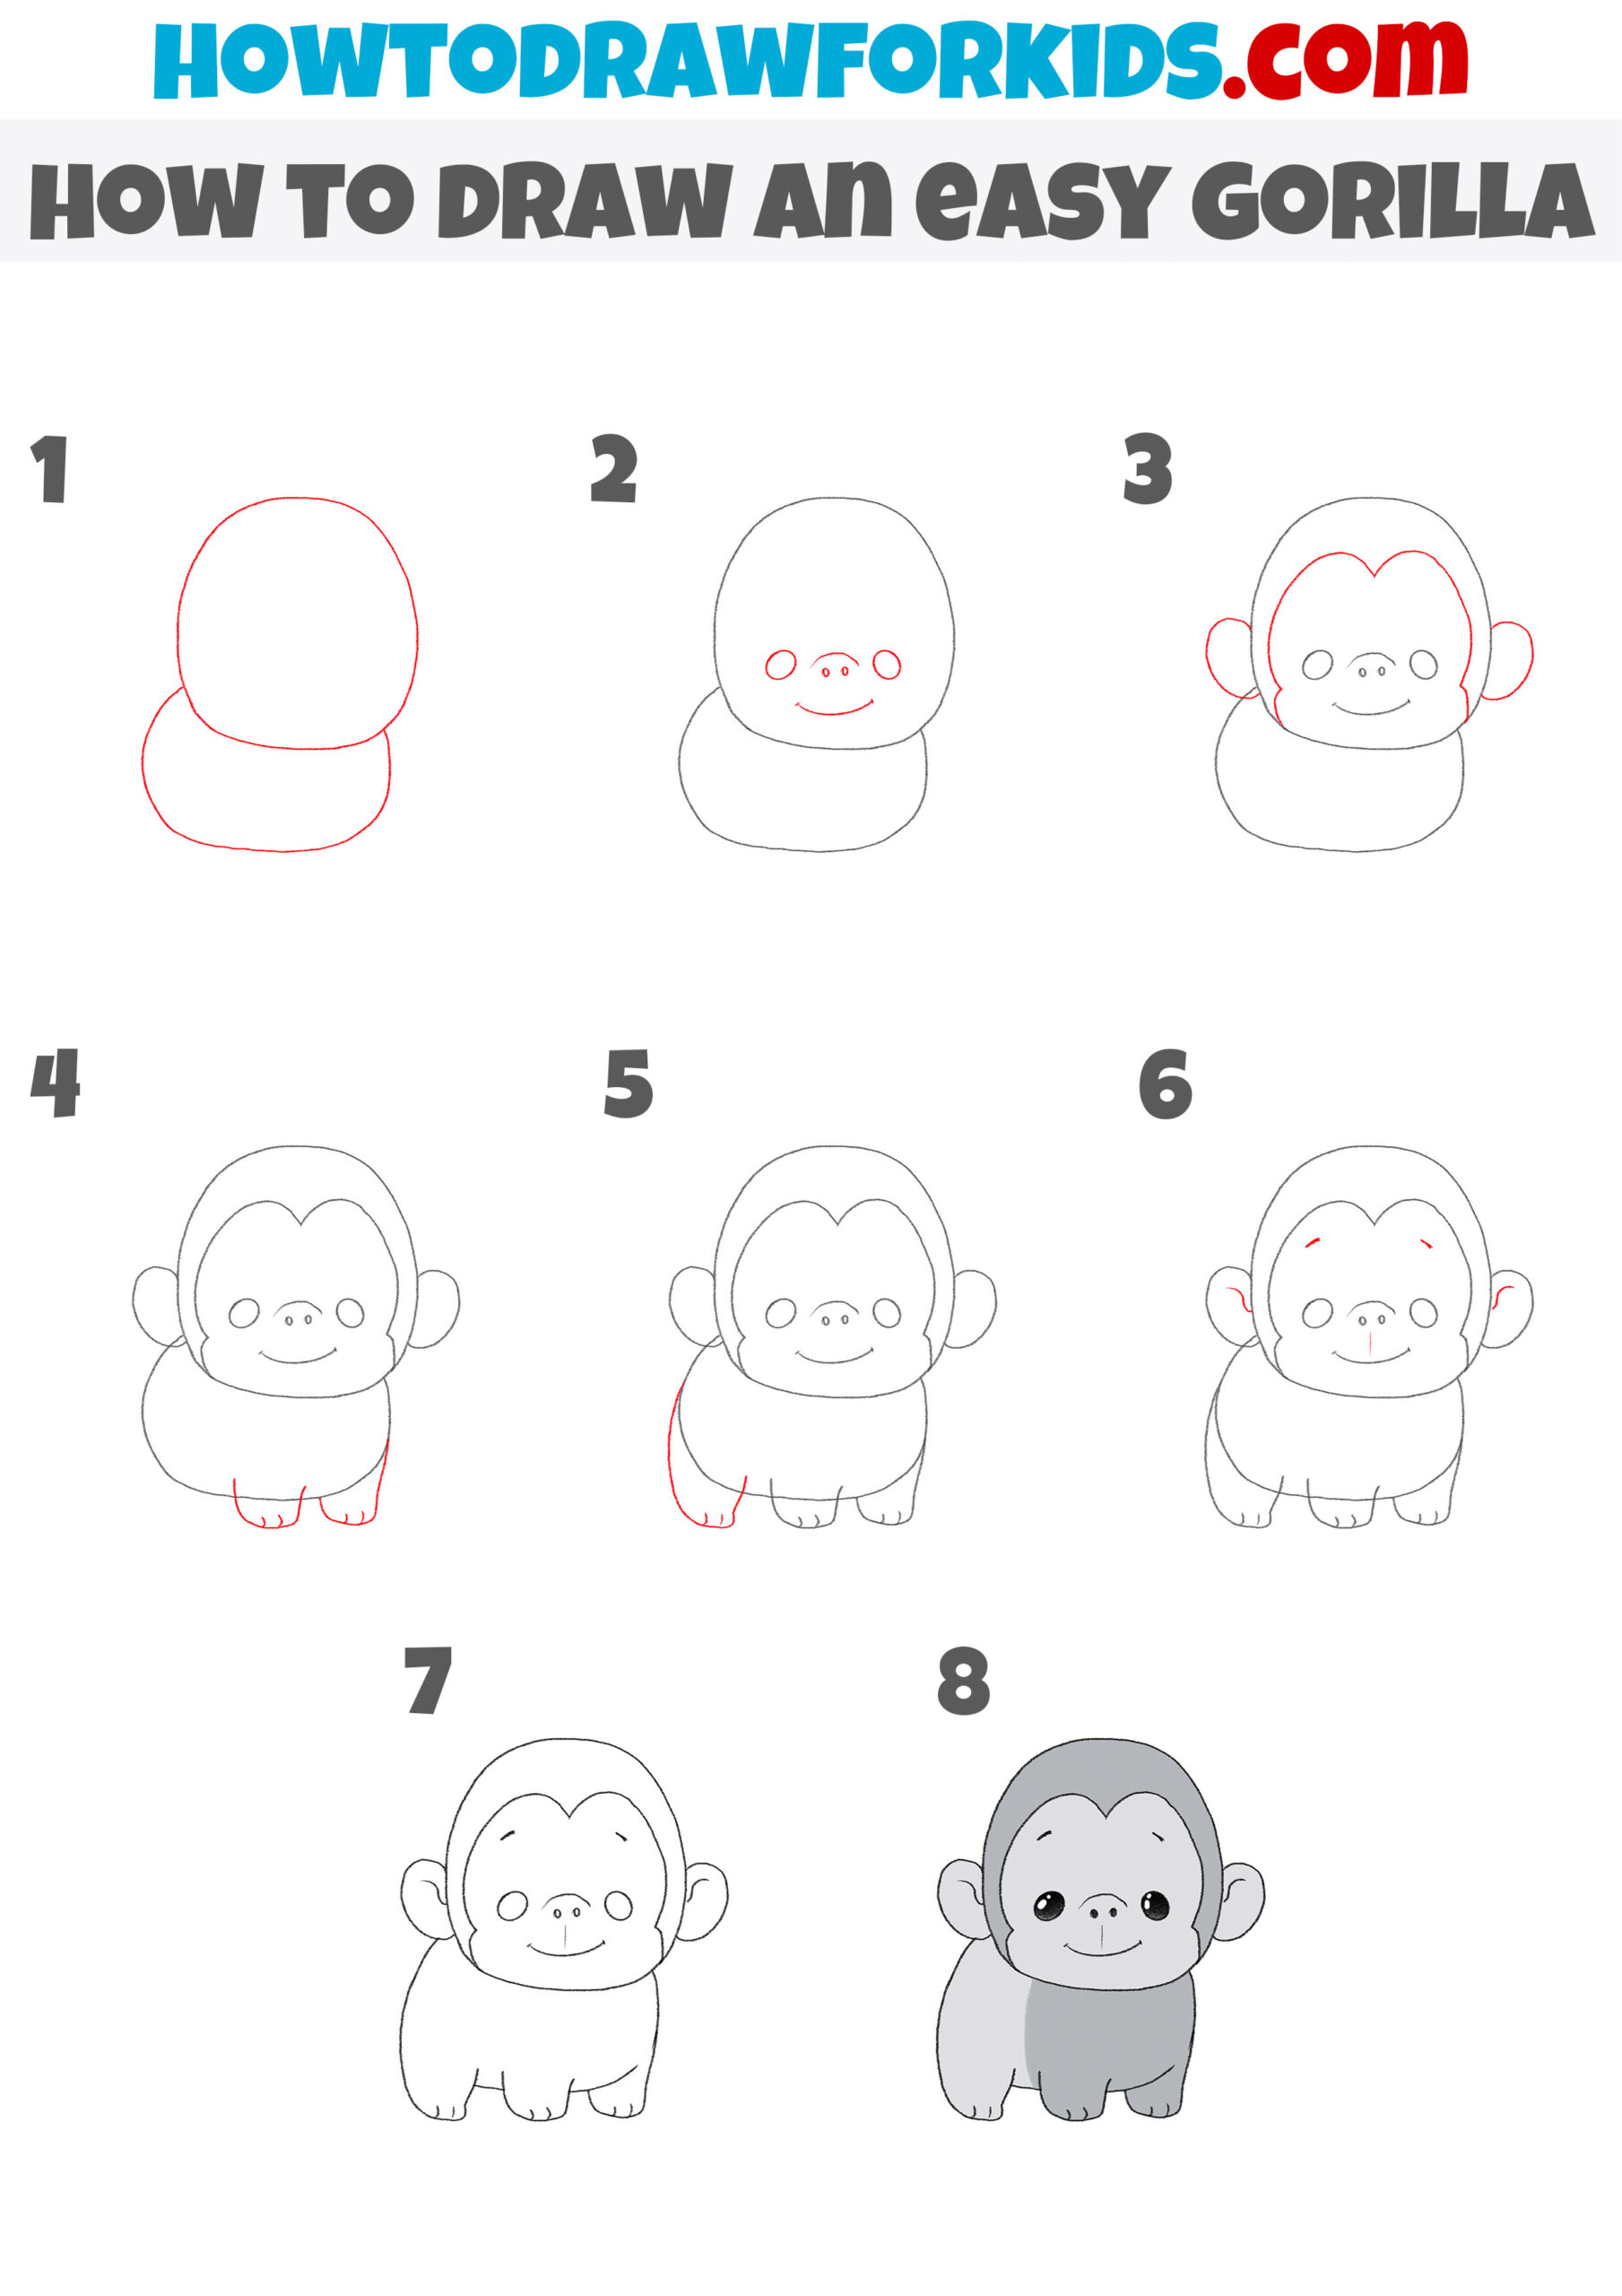 How to Draw an Easy Gorilla - Easy Drawing Tutorial For Kids